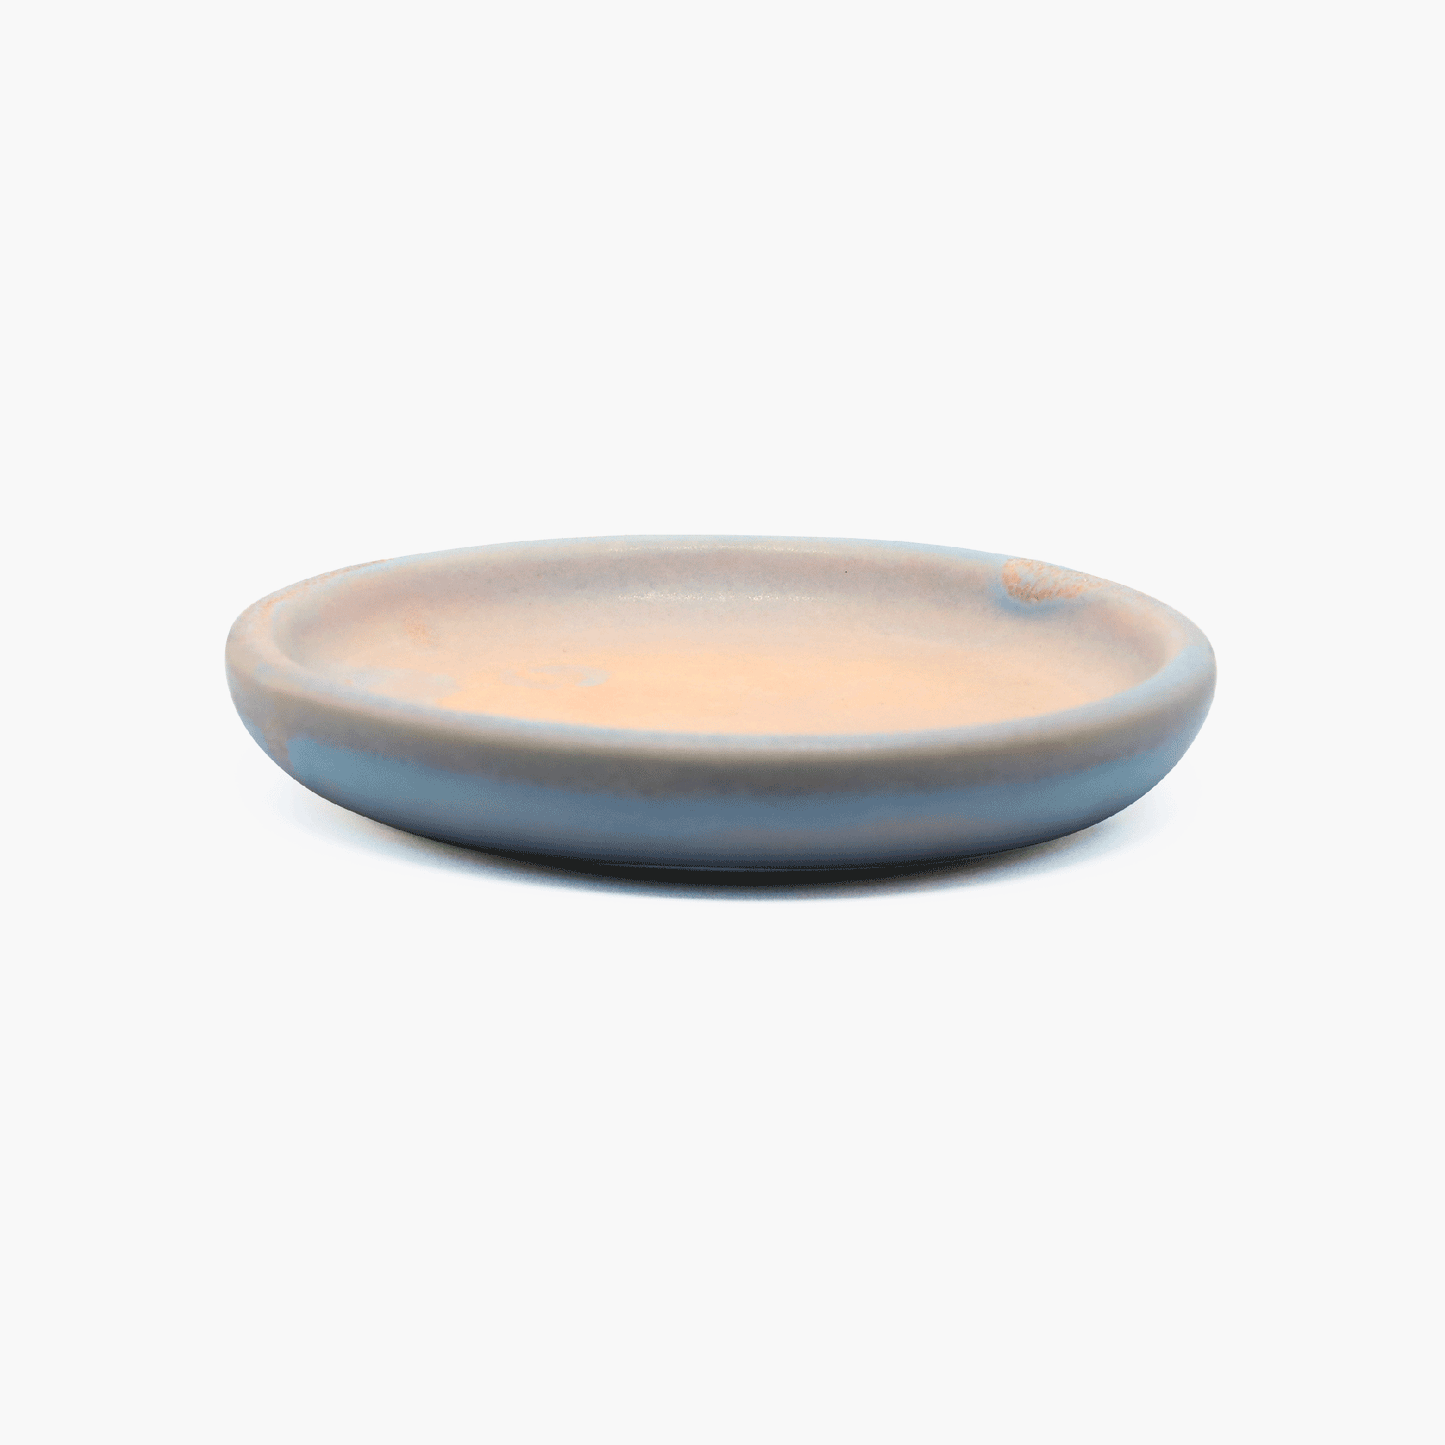 Bubble Valet Plate in Peach and Silver Blue Semi-Porcelain